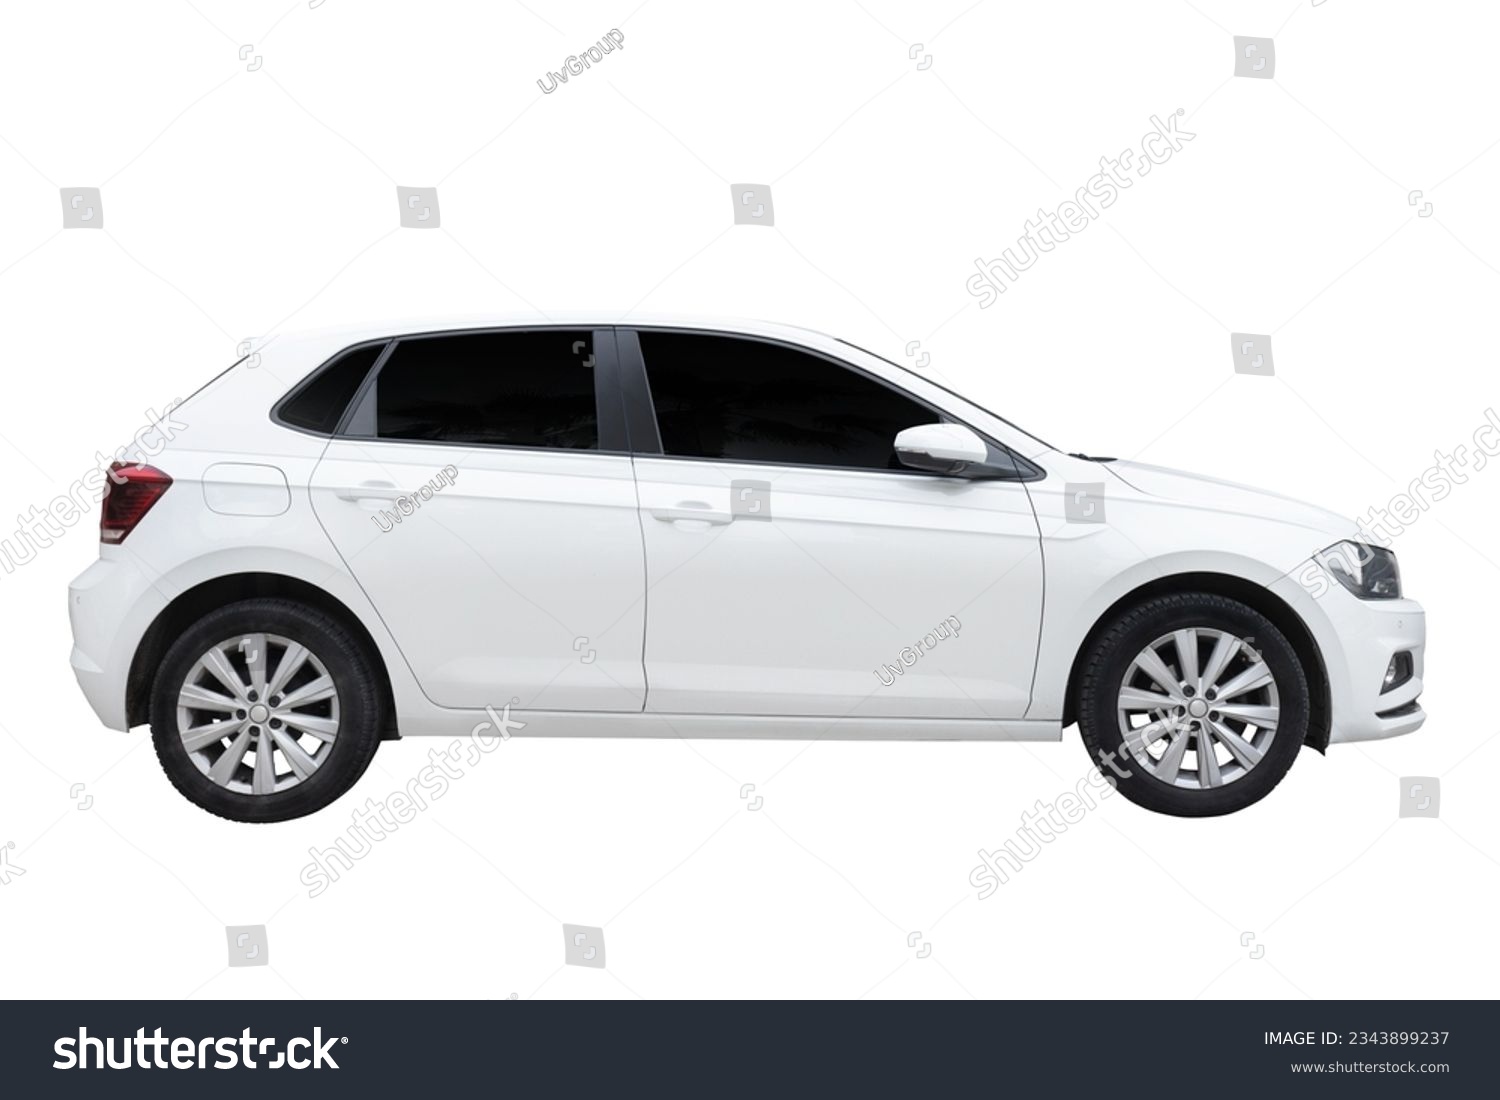 Passenger car isolated on a white background, with clipping path. Full Depth of field. Focus stacking, side view.  #2343899237